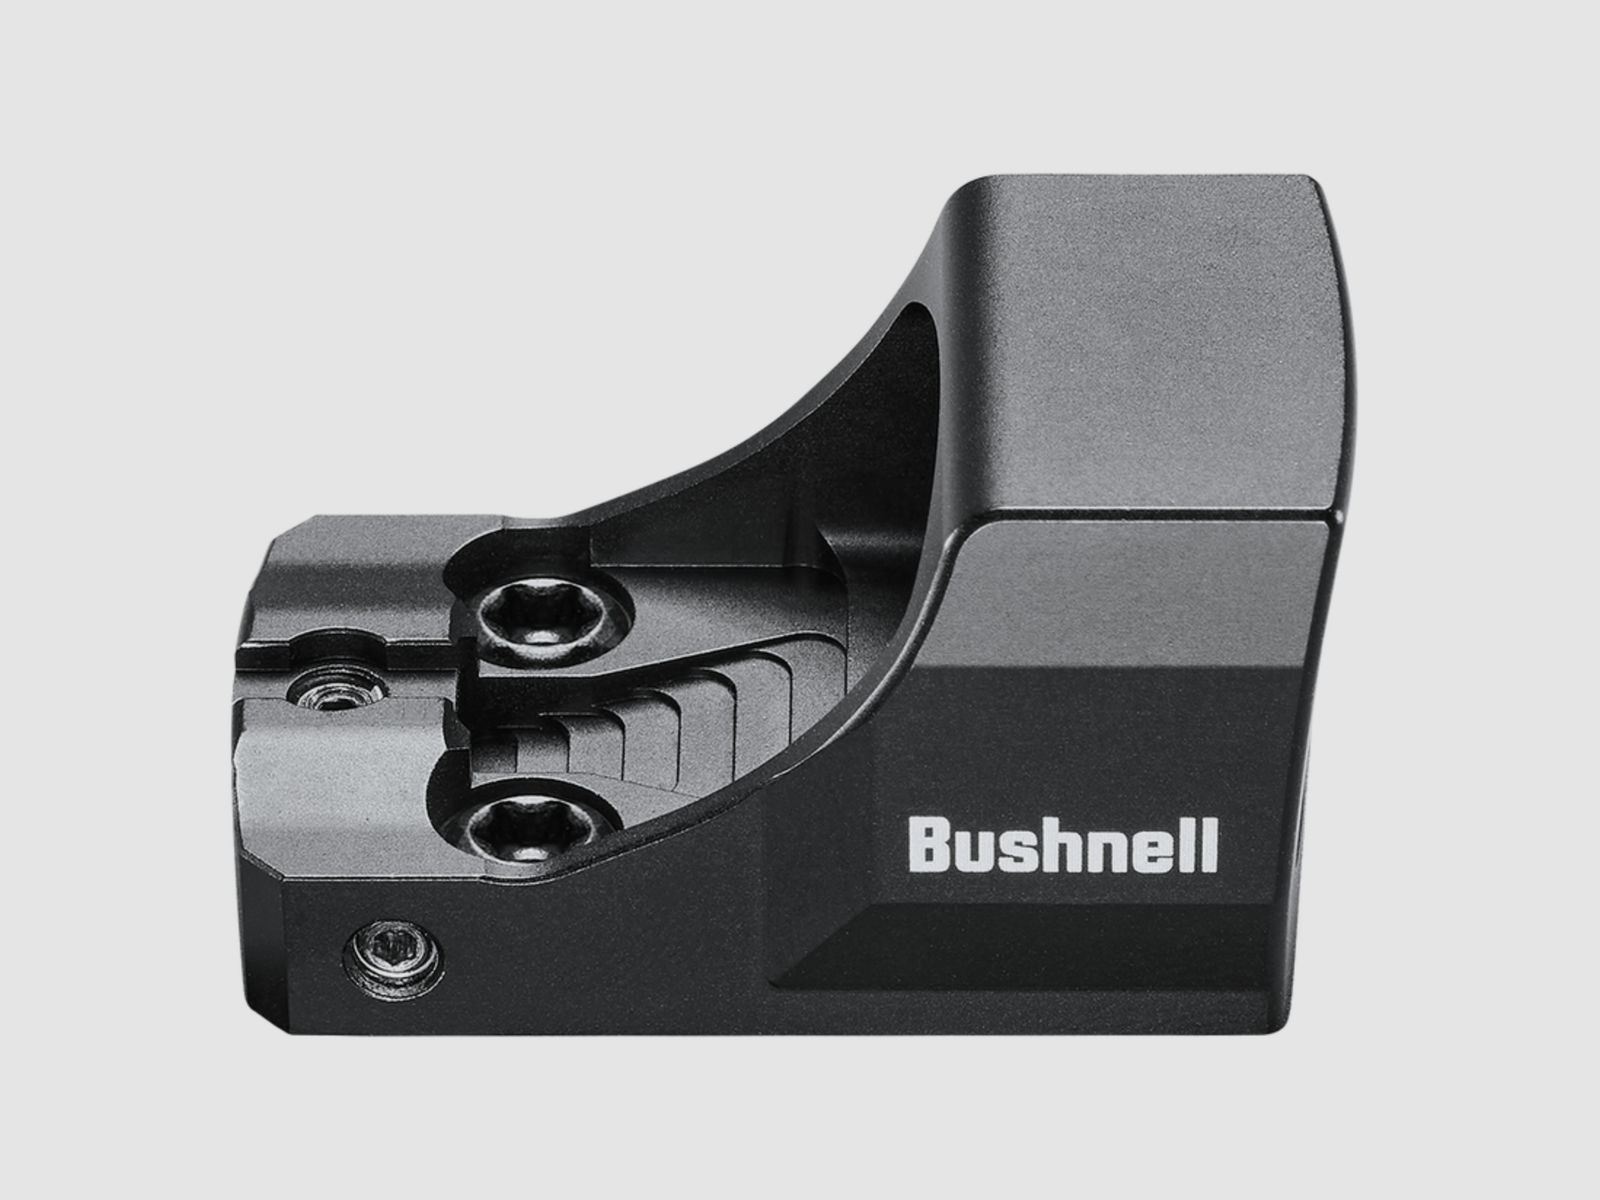 Bushnell RXC-200 1x21mm 6 MOA Dot Reticle 15mm TALL